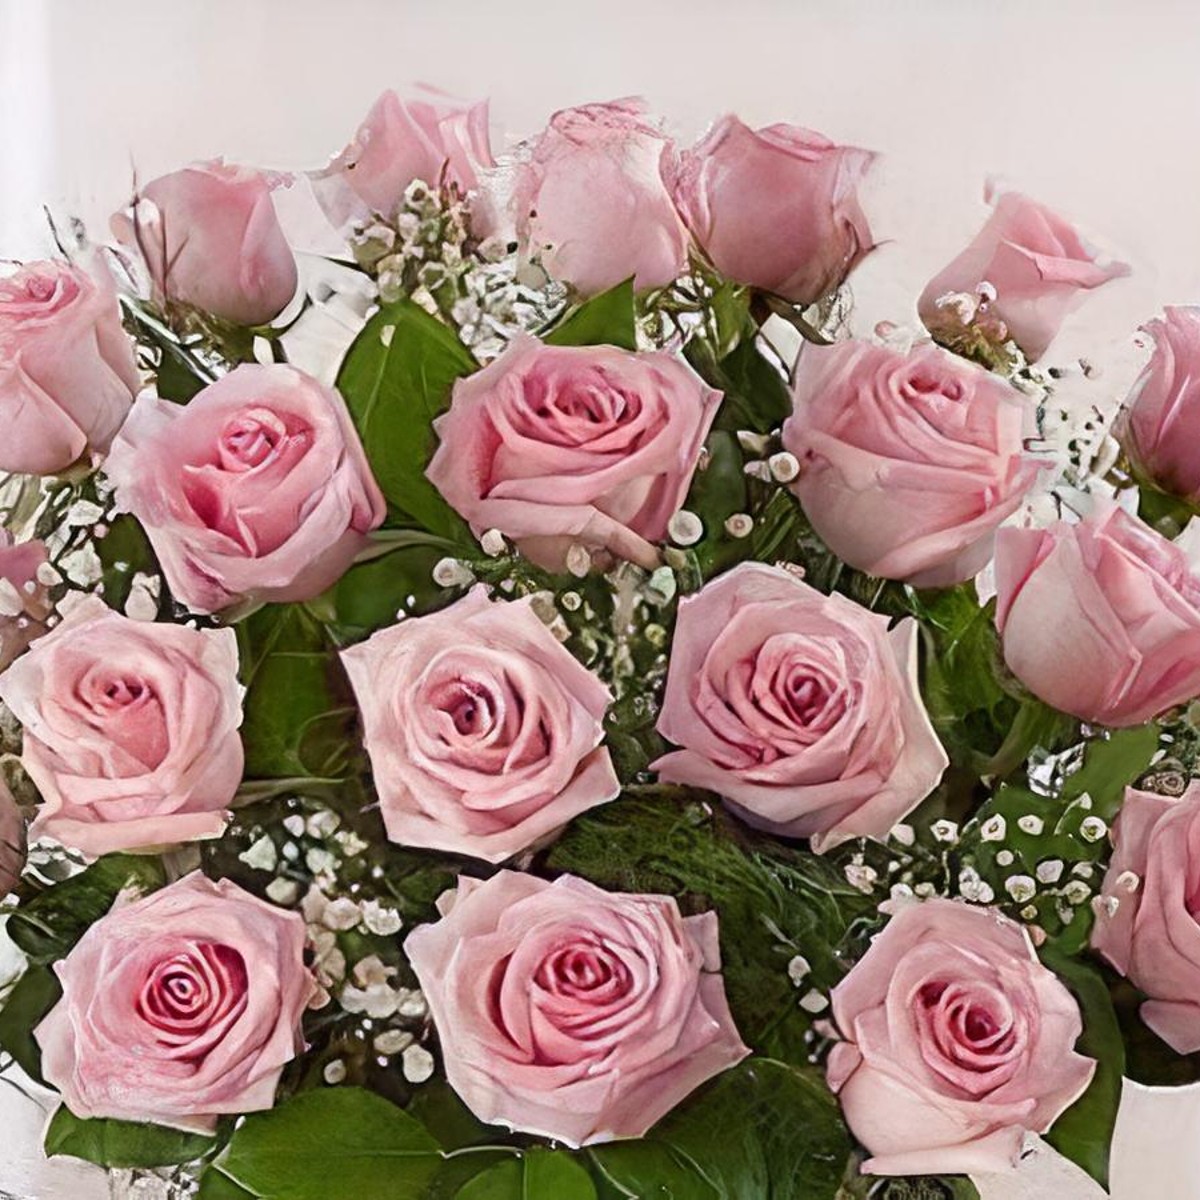 24 Stems Multicolor Staten Island Florist: Petals on Page Florist - Flower  Delivery in NY, 10307